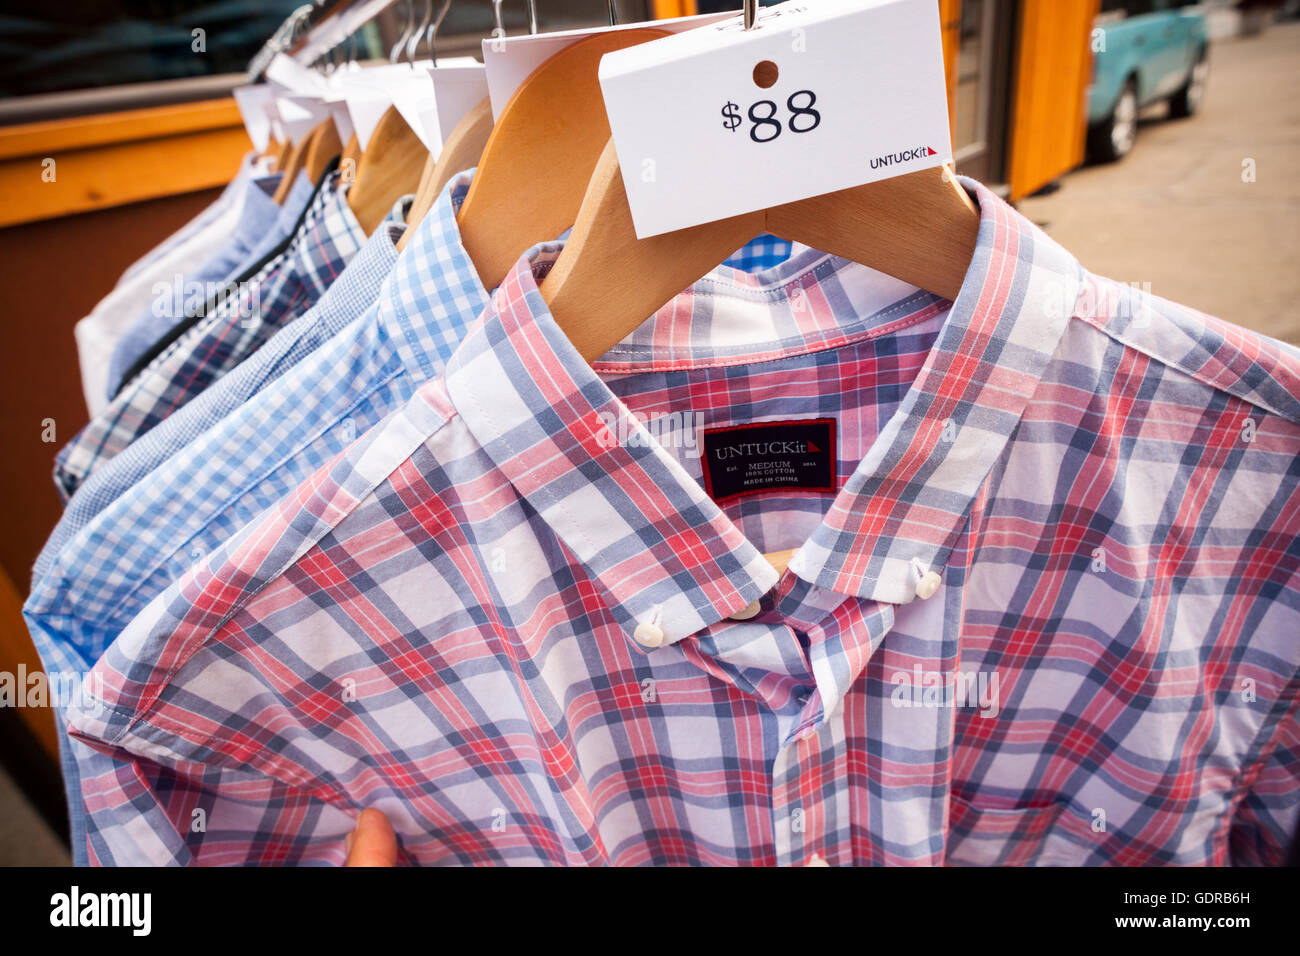 Detail of labels of shirts from the men's apparel company Untuckit at a branding event in Flatiron Plaza in New York on Saturday, July 16, 2016. Untuckit sells shirts through its website and several brick and mortar locations that are meant to be worn untucked. (© Richard B. Levine) Stock Photo